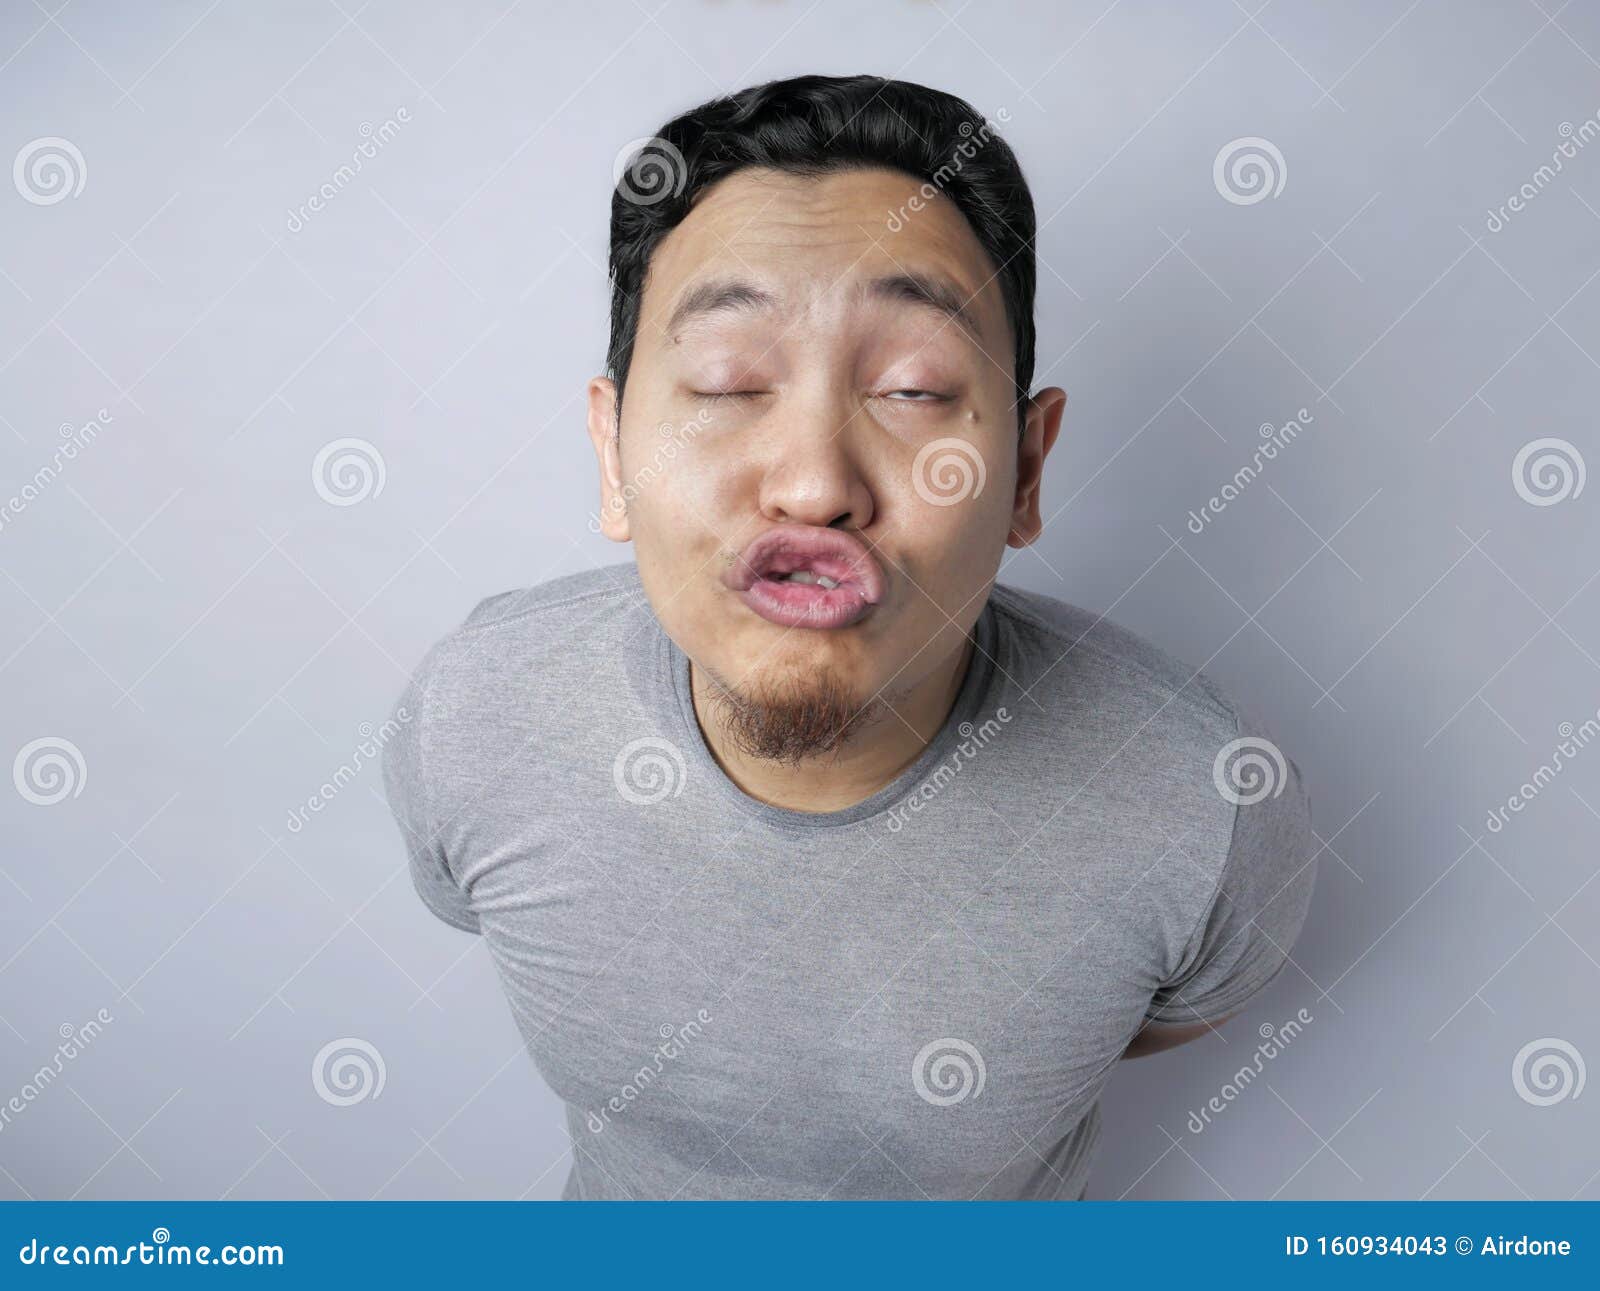 Funny Silly Asian Man Trying To Kiss Stock Image - Image of cute, funny:  160934043